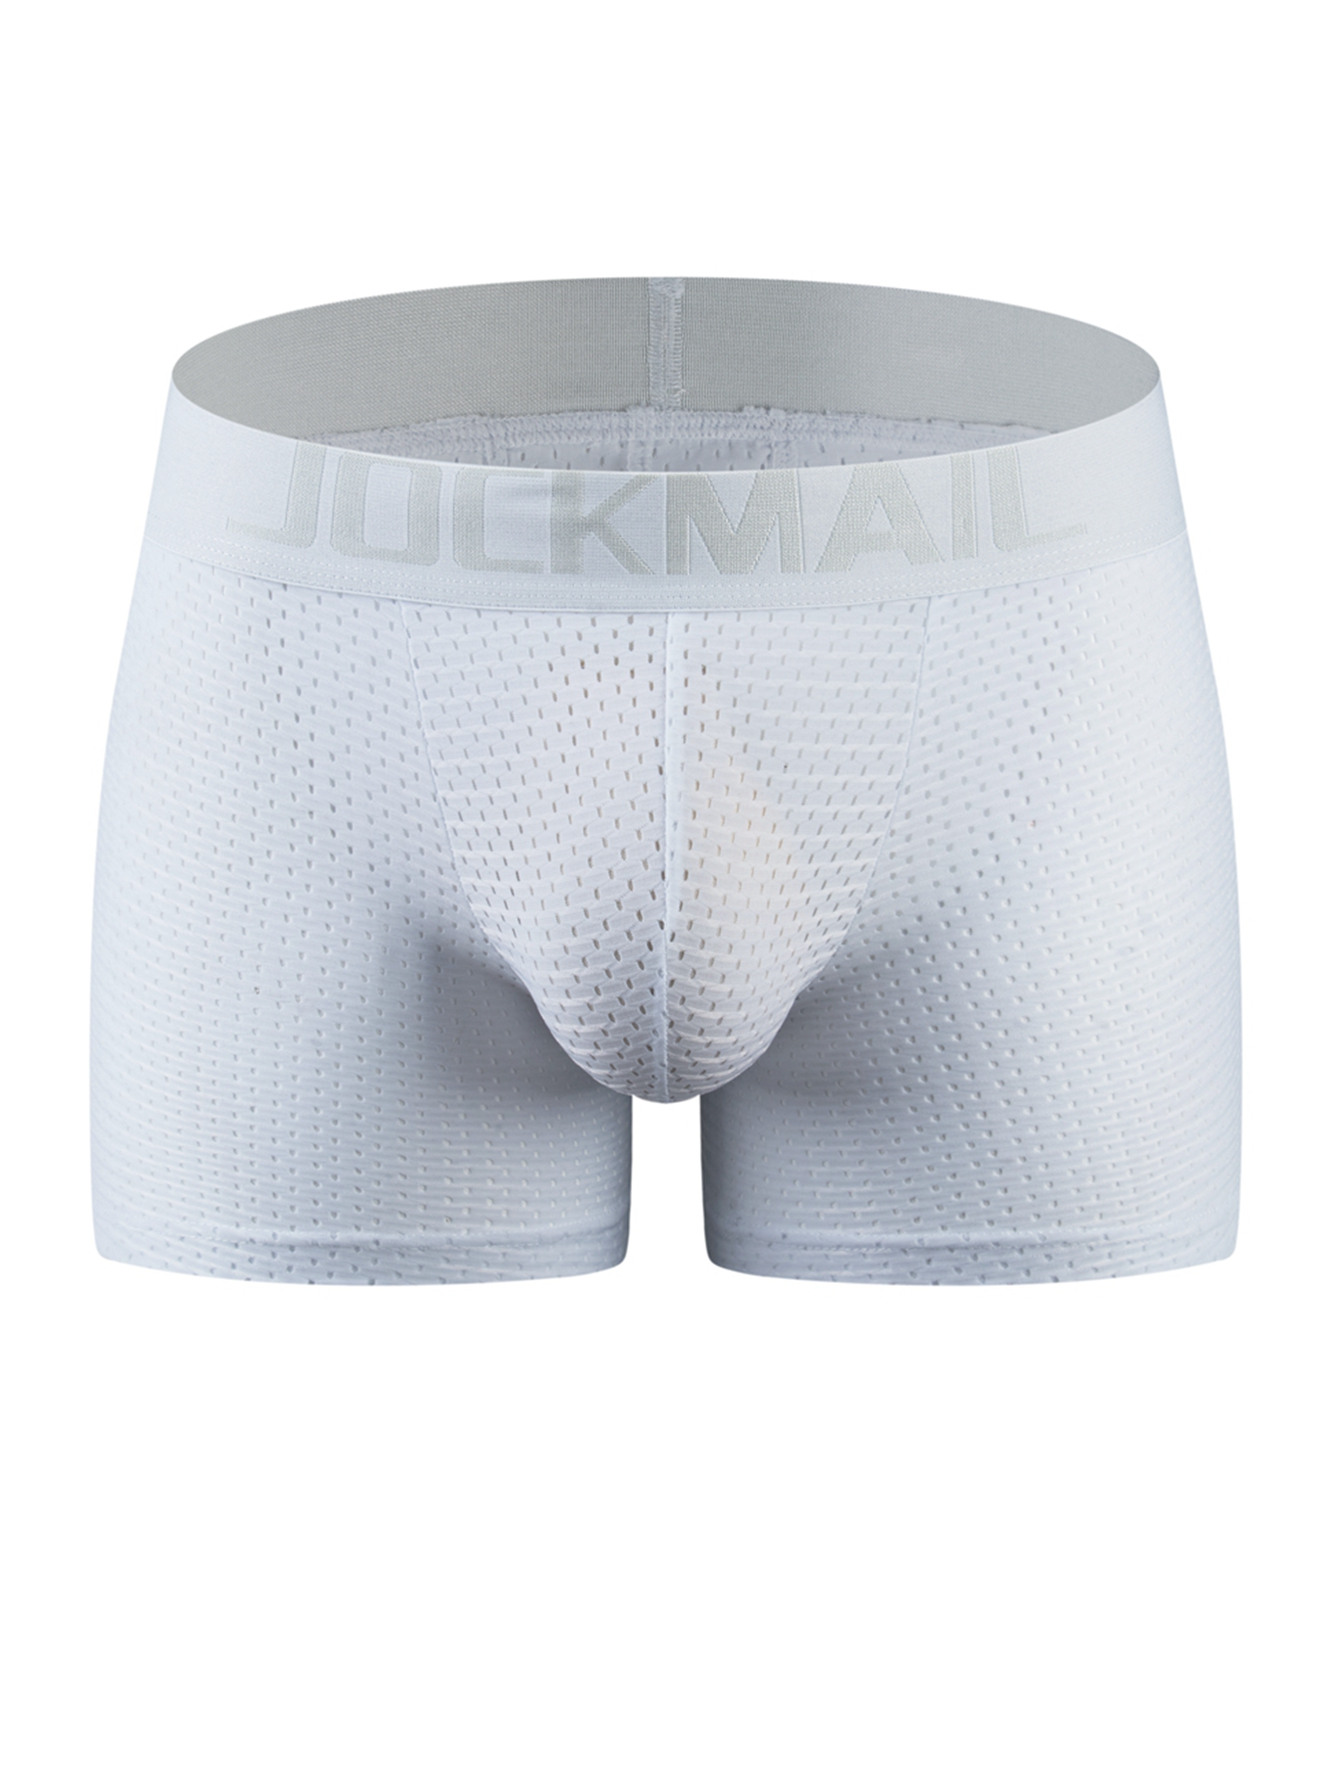 Padded Underpants For Men Boxer Mens Package And Butt Padded